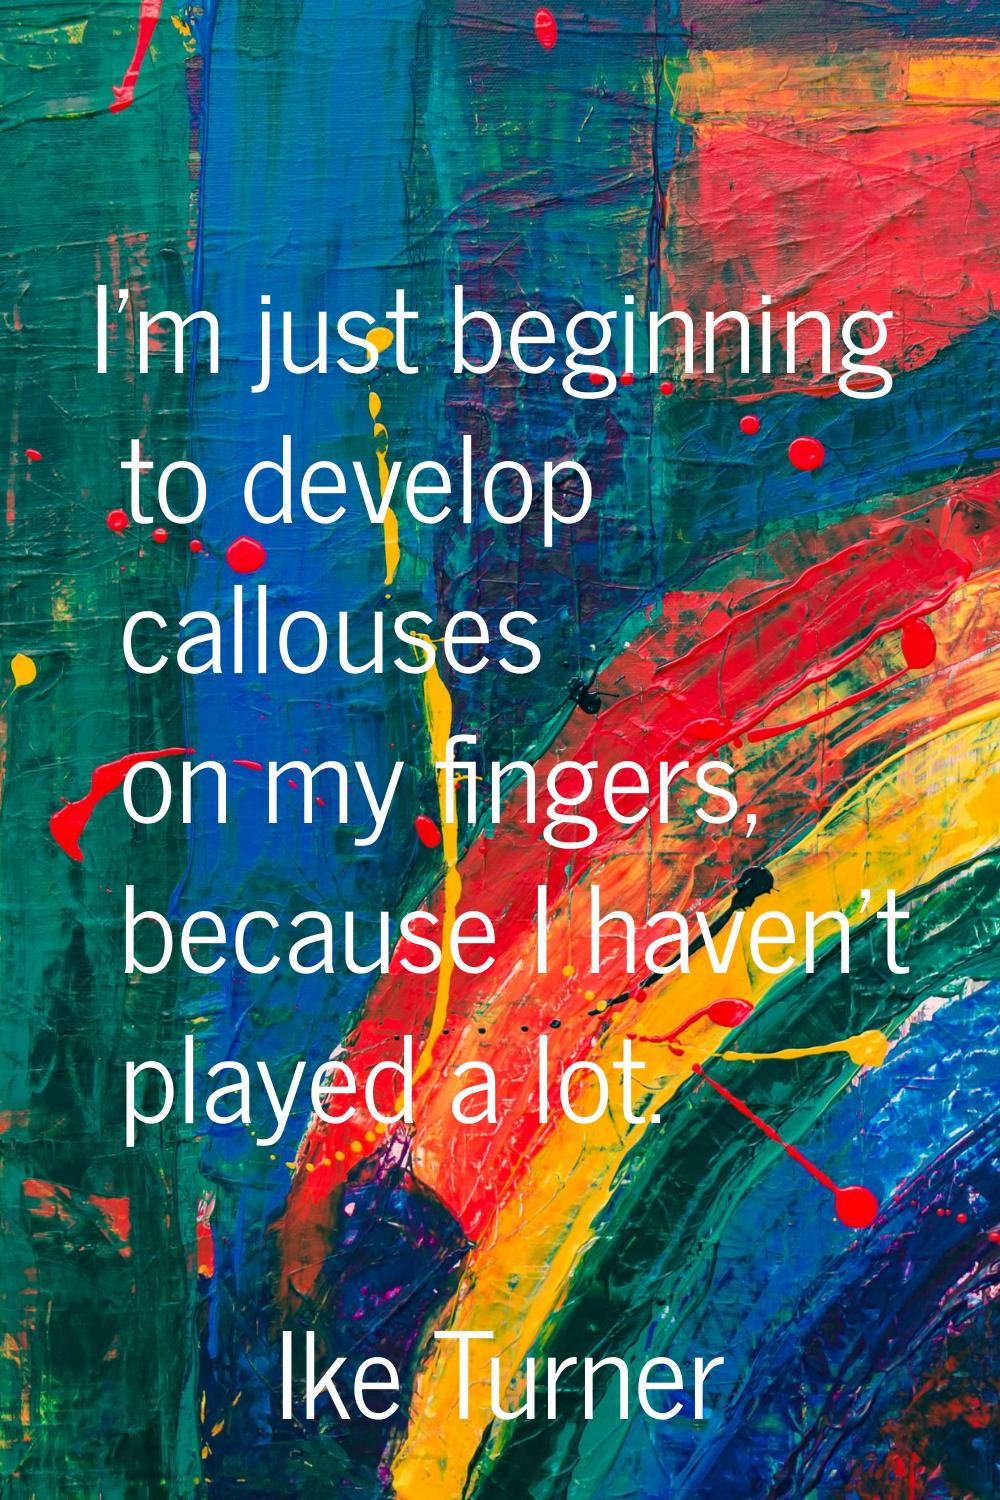 I'm just beginning to develop callouses on my fingers, because I haven't played a lot.